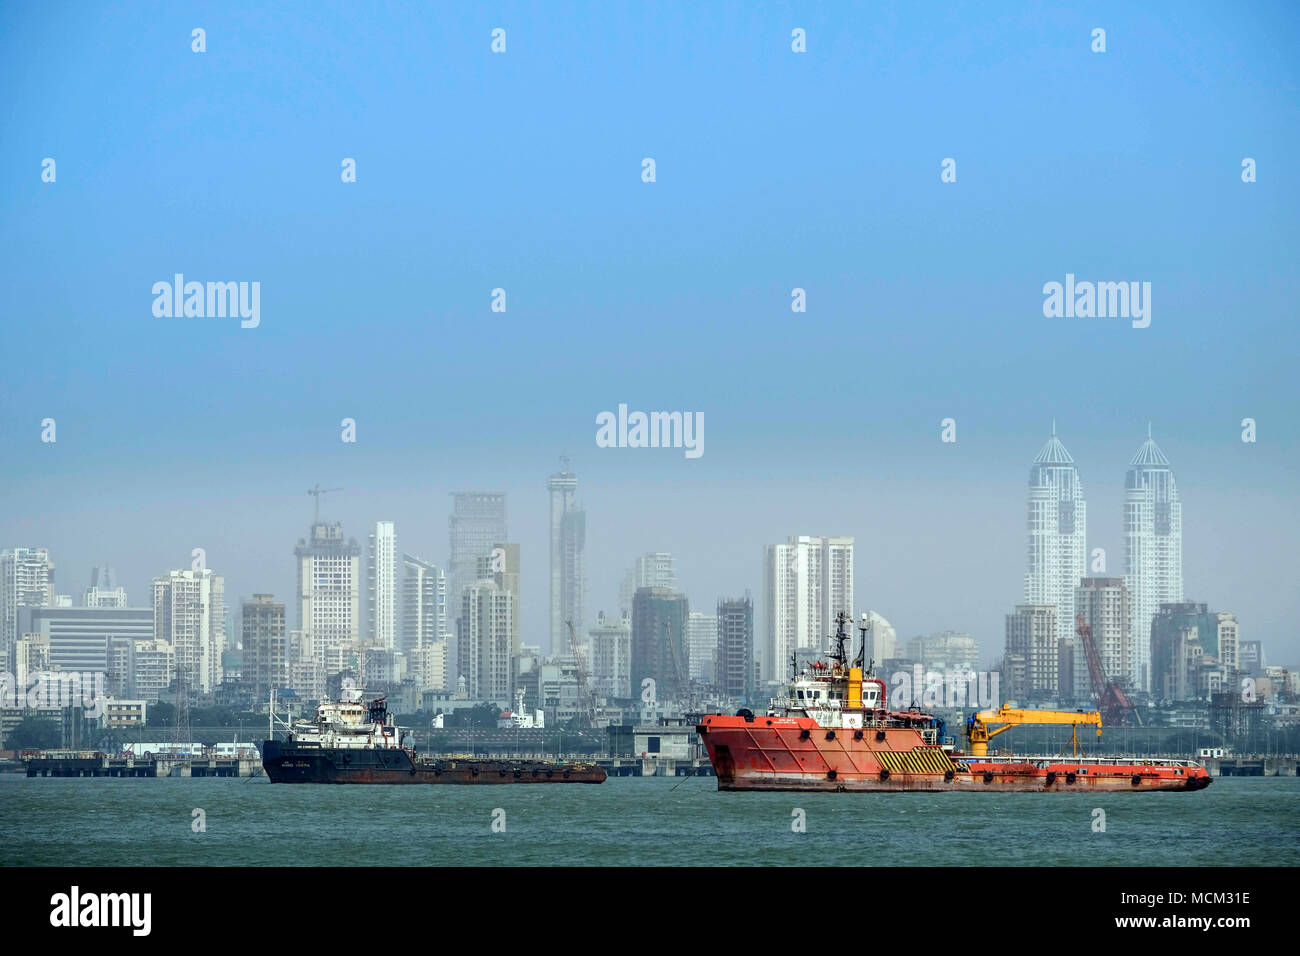 View of tug boats in Back Bay off Norman point with the skyscrapers of Colaba and modern Mumbai in the background. Port of Mumbai Stock Photo